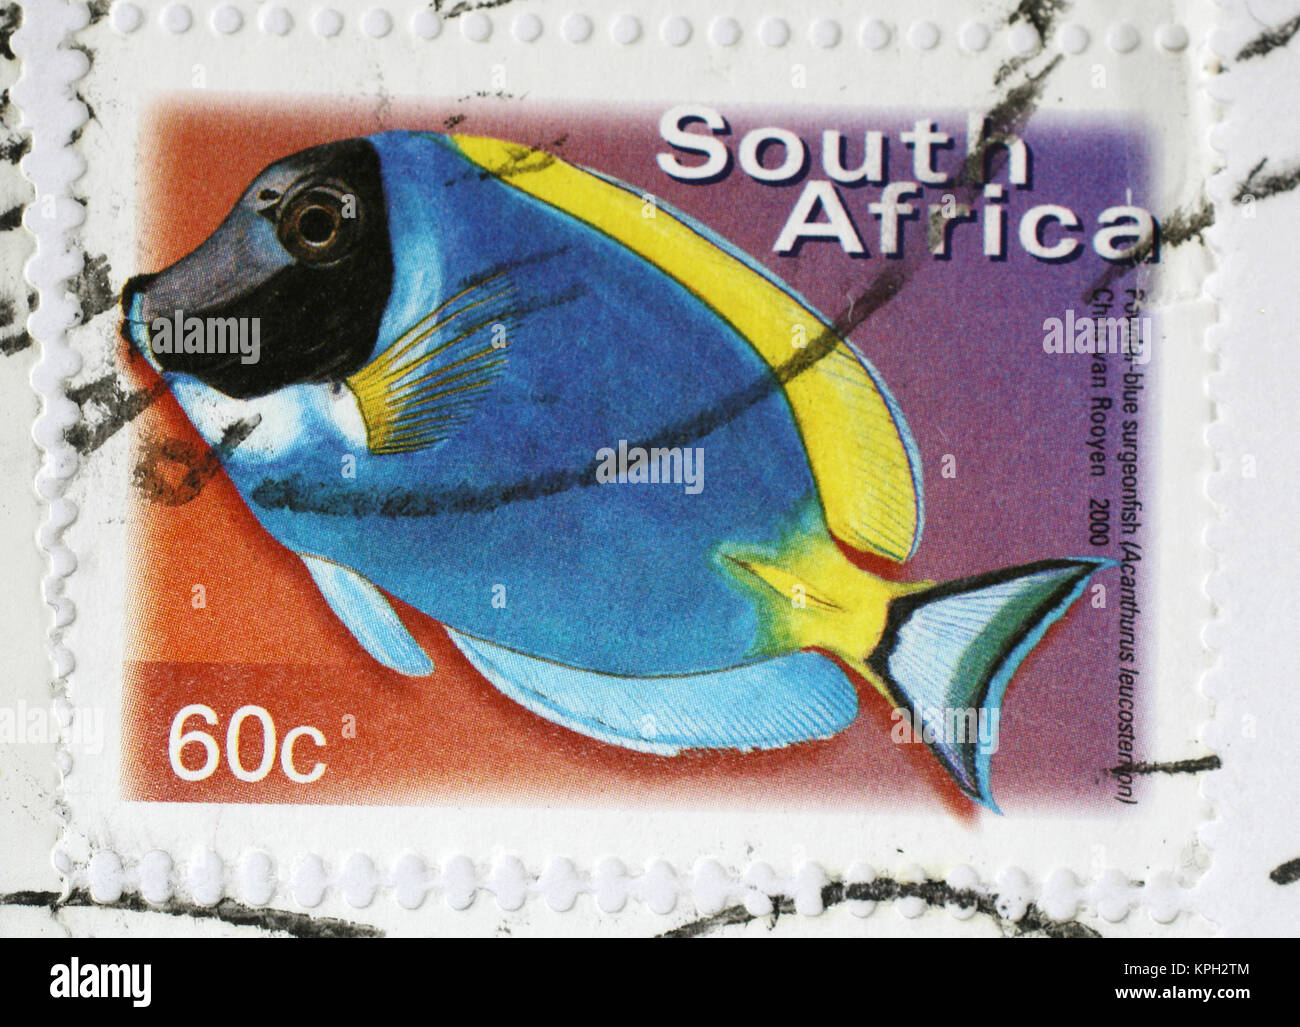 South African postage stamp, Powder-blue surgeonfish, 60 cents value, Chris van Rooyen; 2000, South Africa. Stock Photo